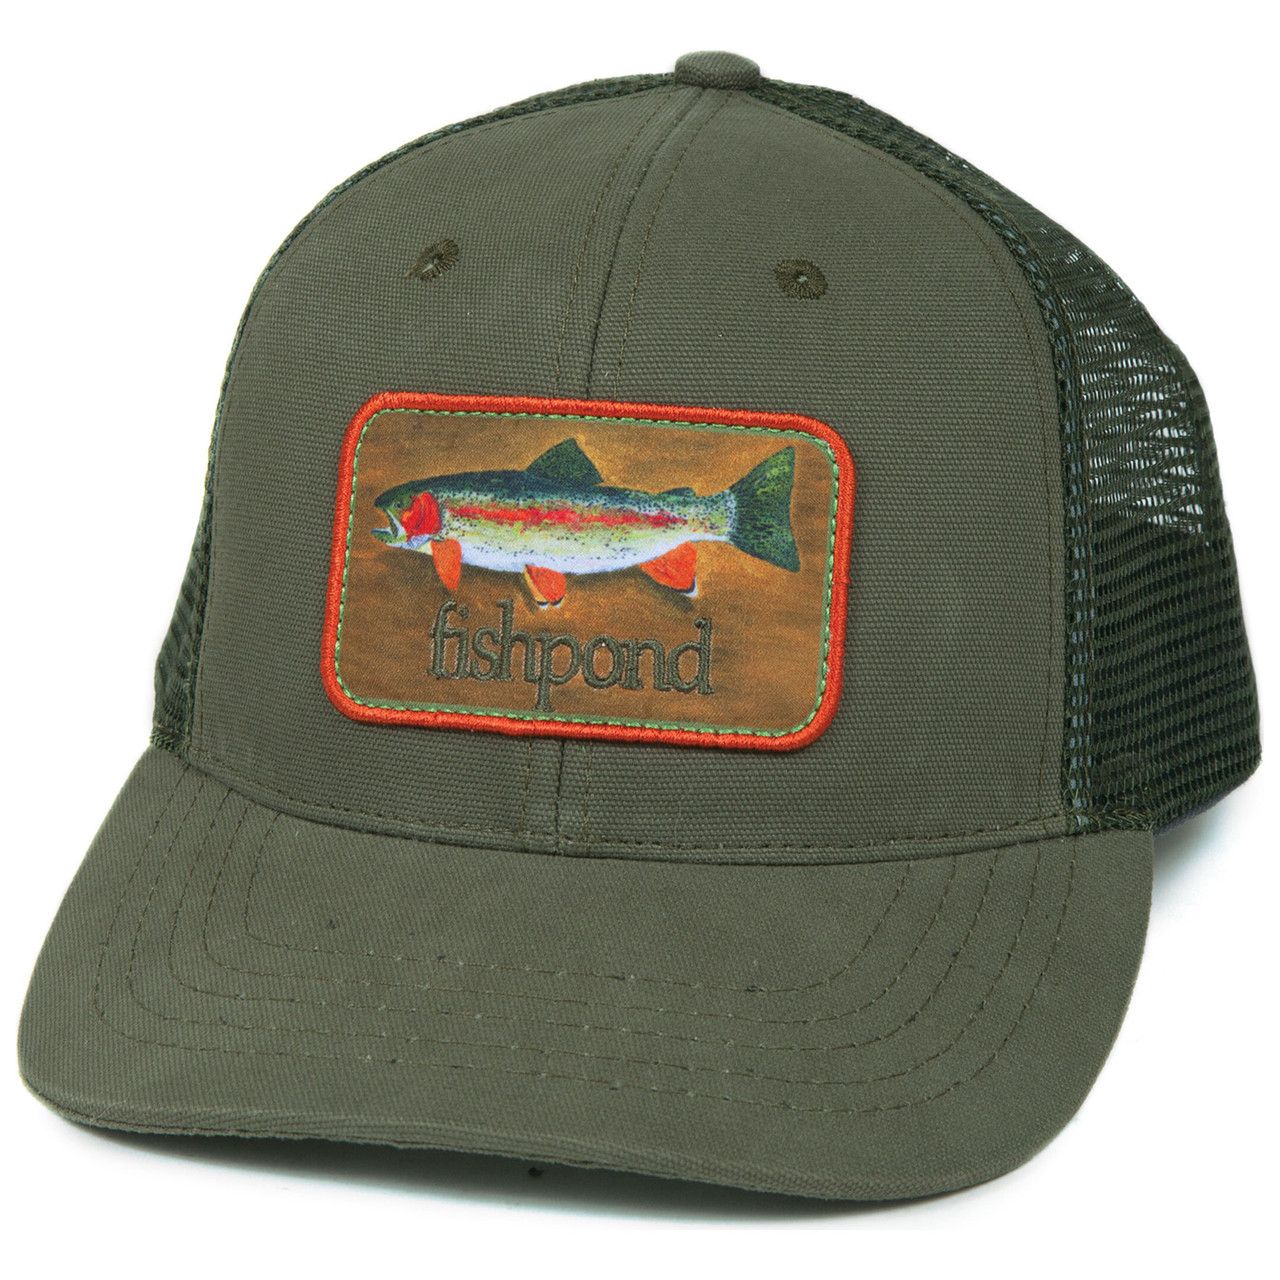 Fishpond Rainbow Trout Trucker Hat - Hunter Banks Fly Fishing